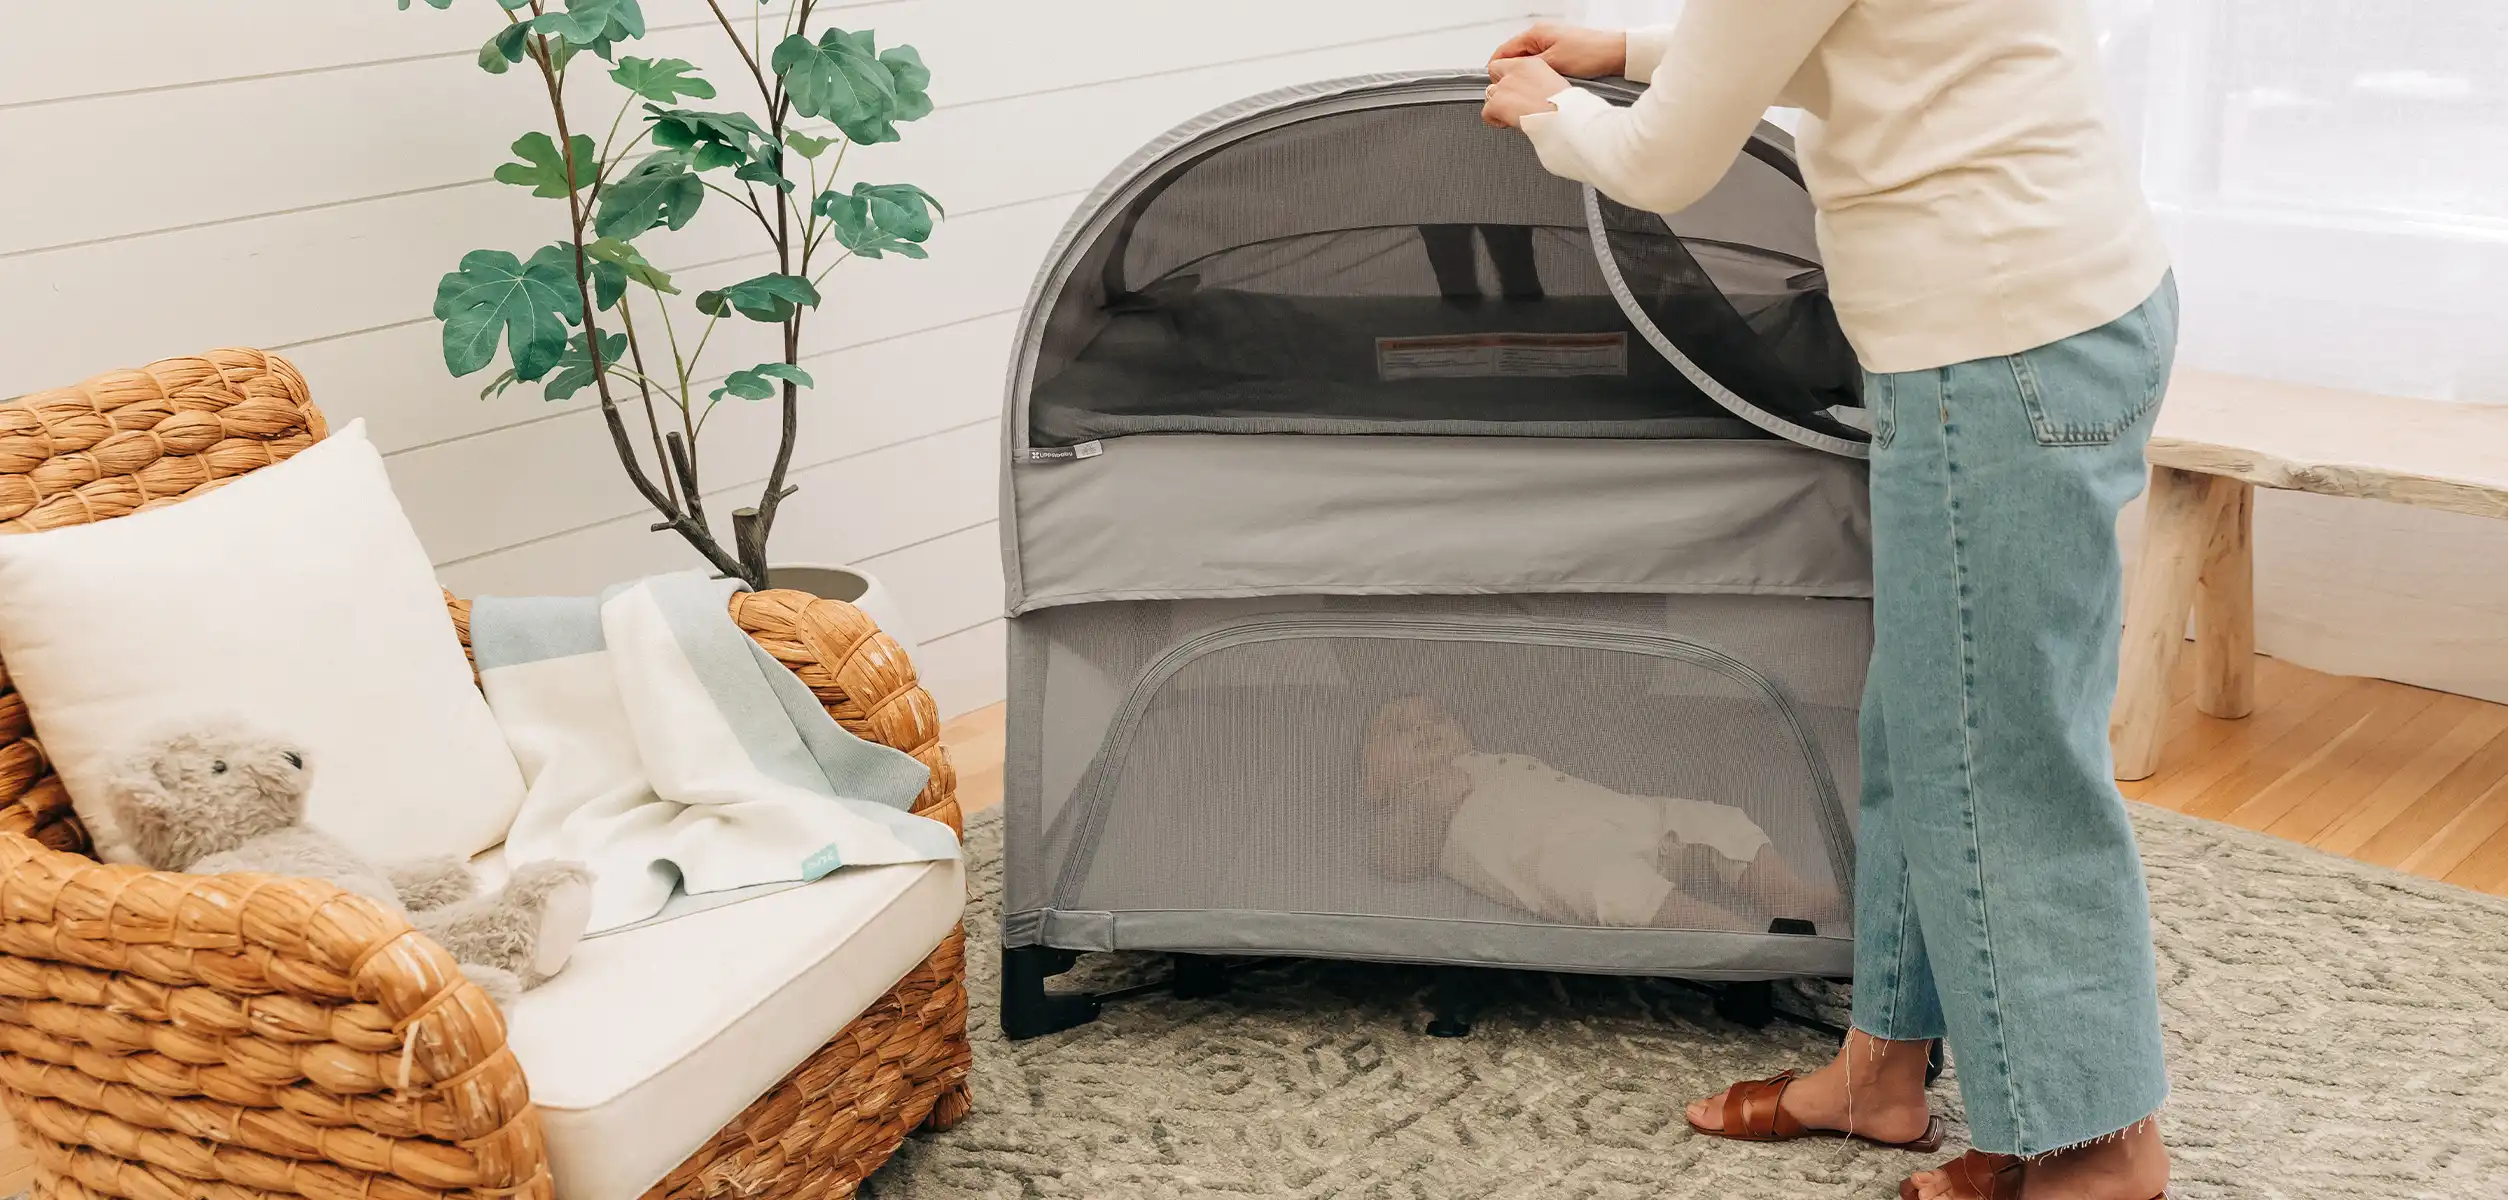 A woman easily attaches the Remi Canopy accessory to her Remi inside to darken the room for her infant